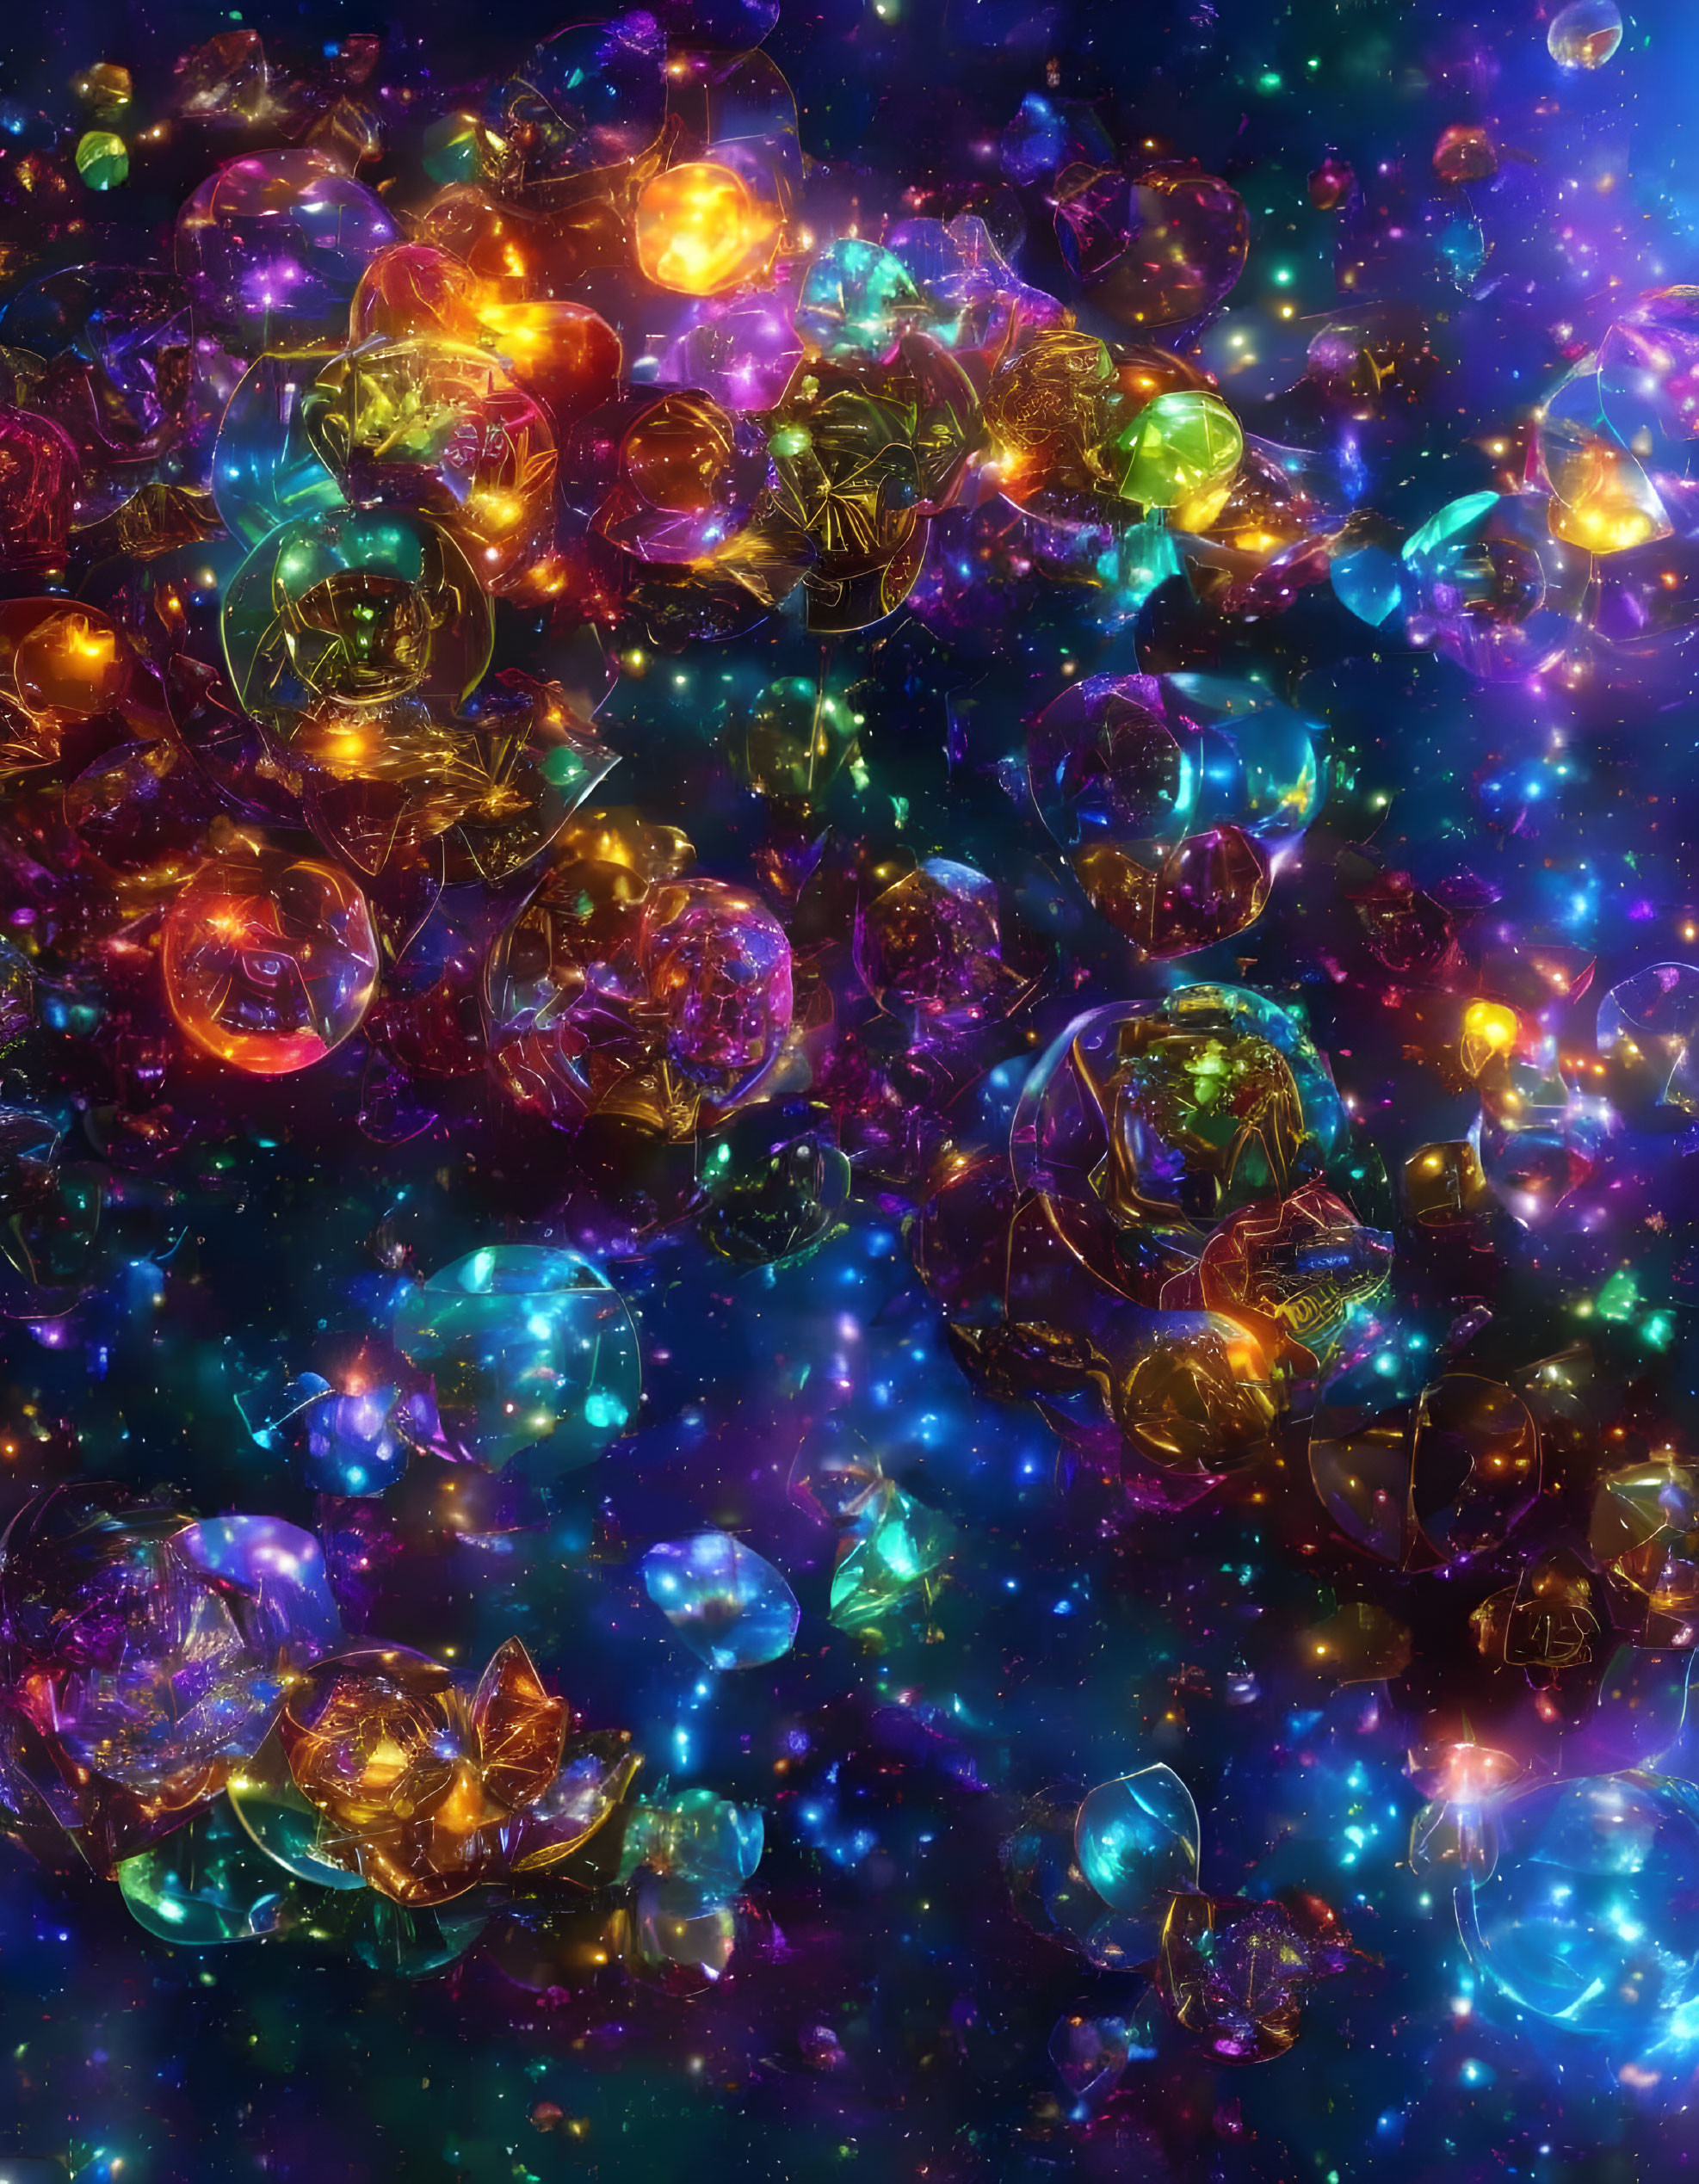 Colorful Bubble Art in Cosmic Setting